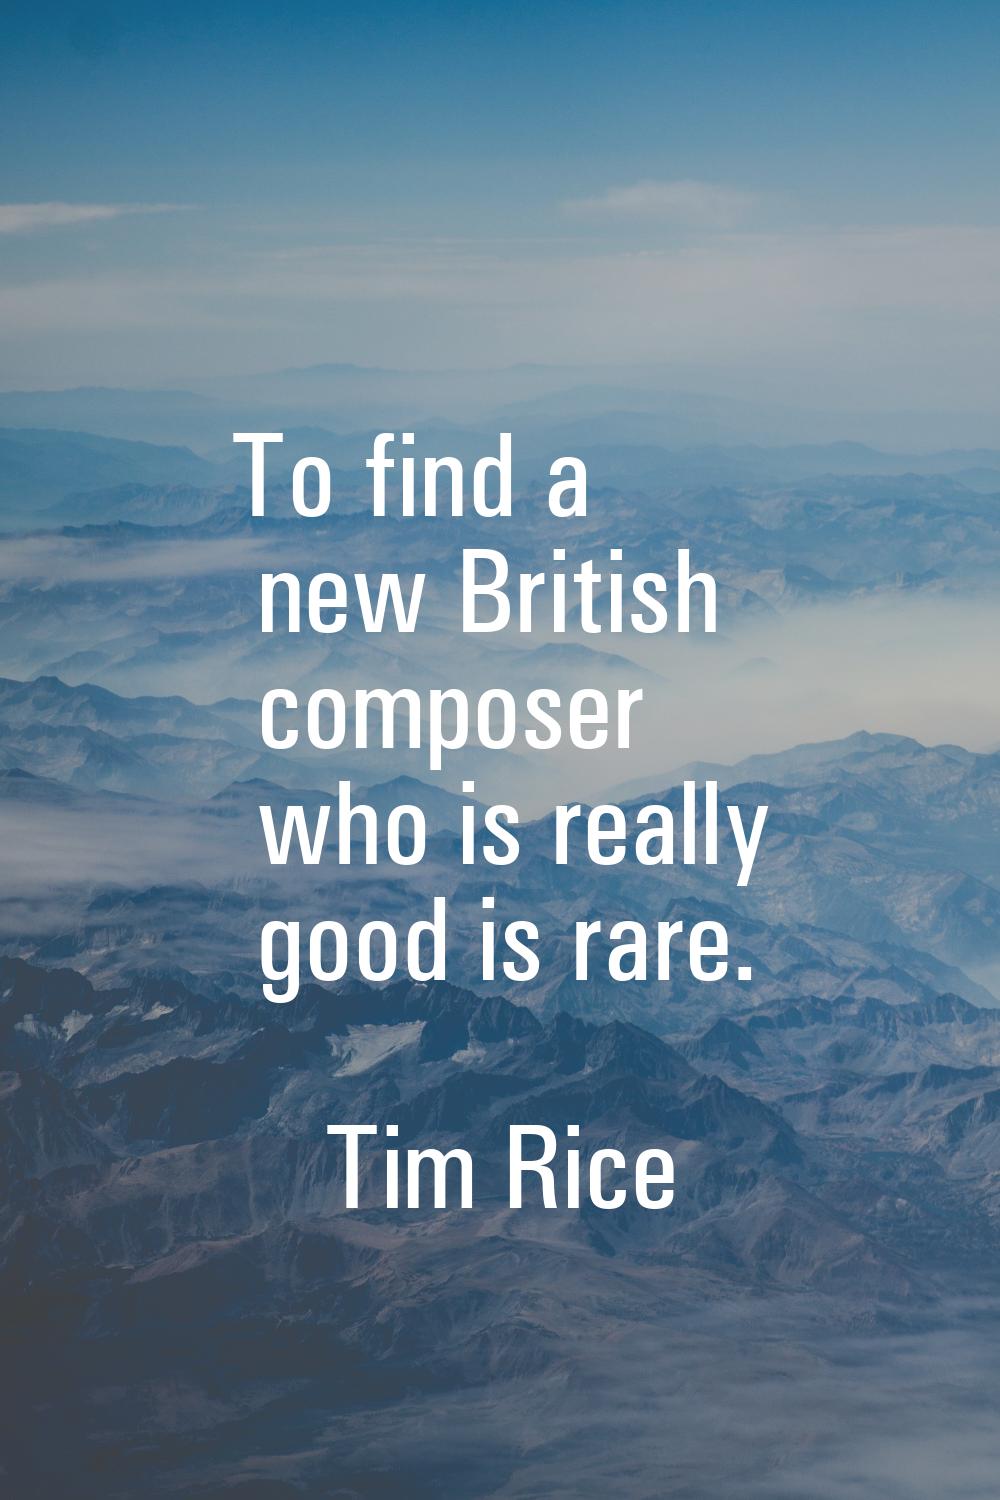 To find a new British composer who is really good is rare.